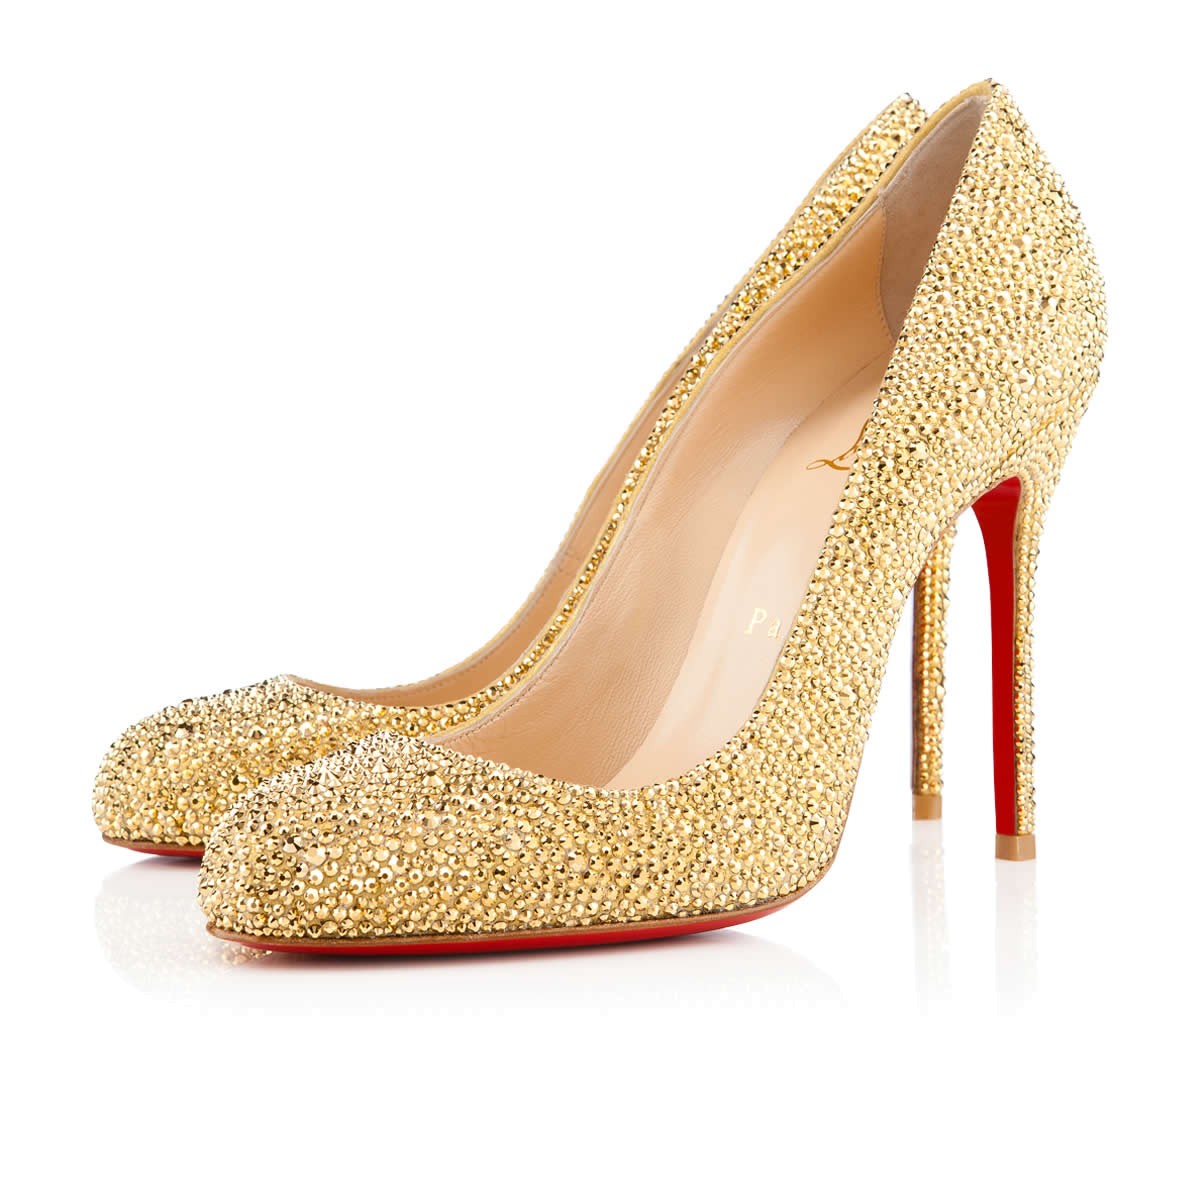 All That Glitters & Gold. Heavenly Heels For Your Wedding